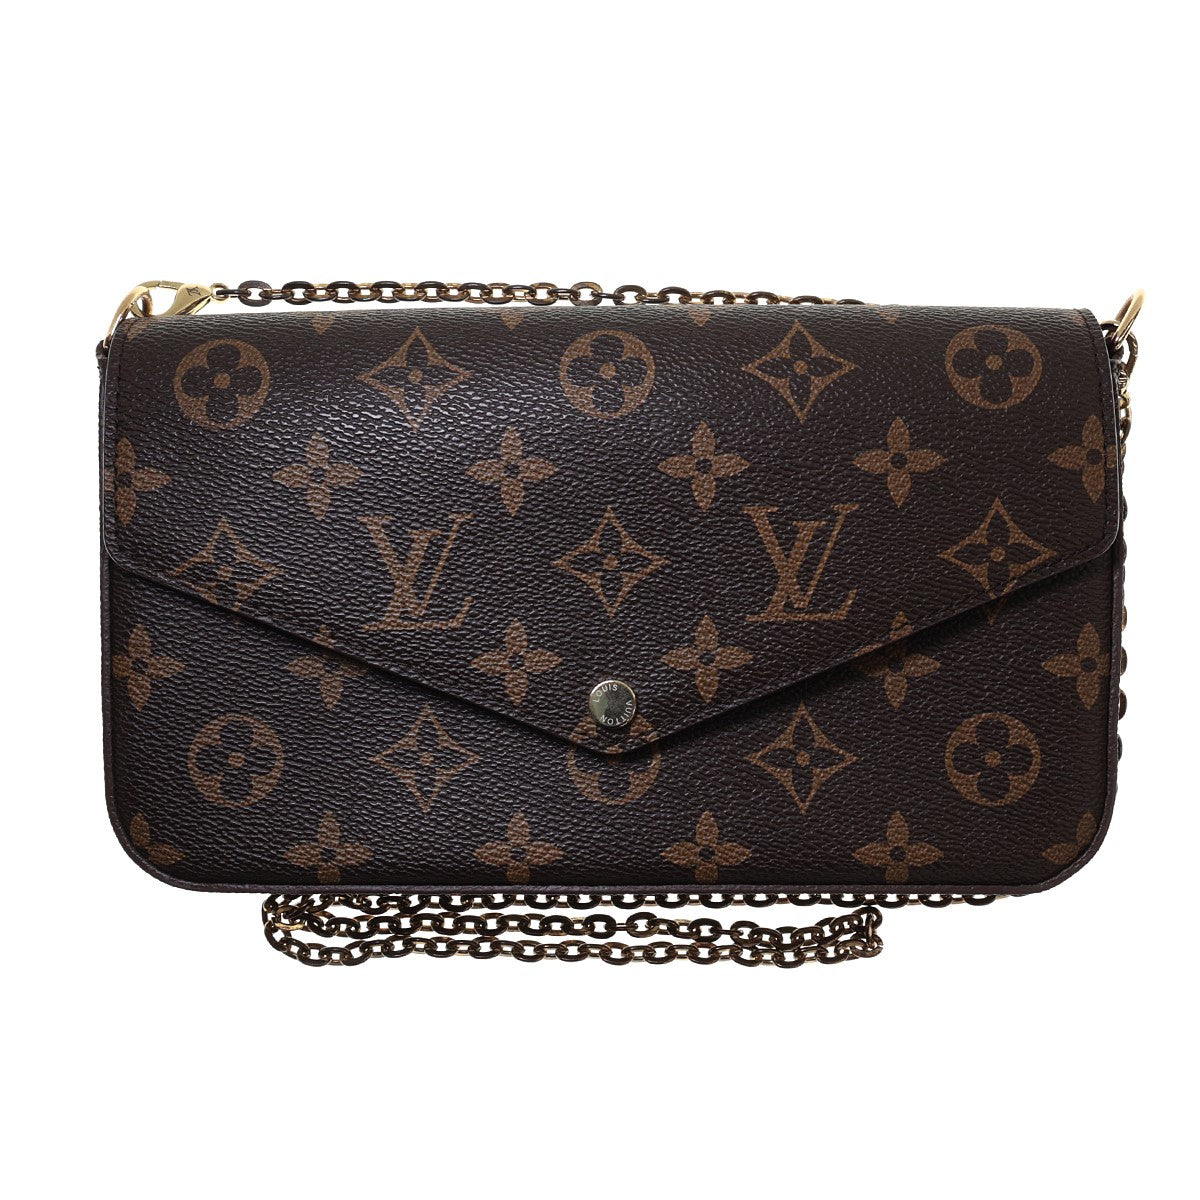 LOUIS VUITTON(ルイヴィトン) モノグラム ポシェット フェリシー 2WAY 